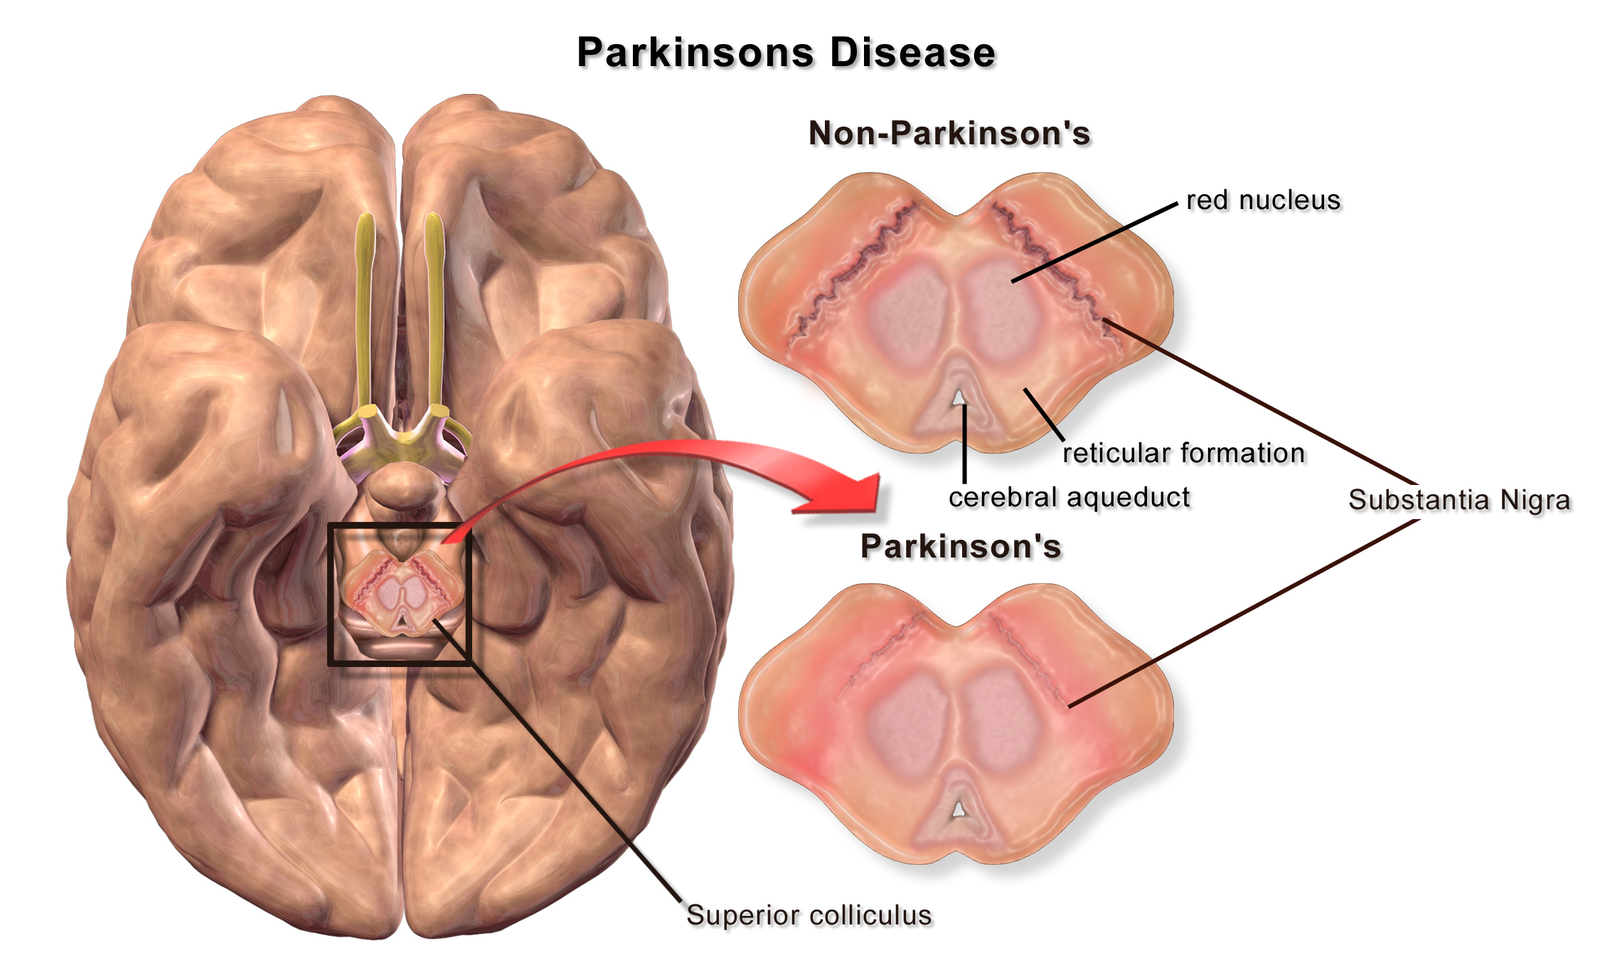 A bottom-up diagram of a brain of a patient with Parkinson's disease illustrating loss of pigmented cells in the Substantia nigra